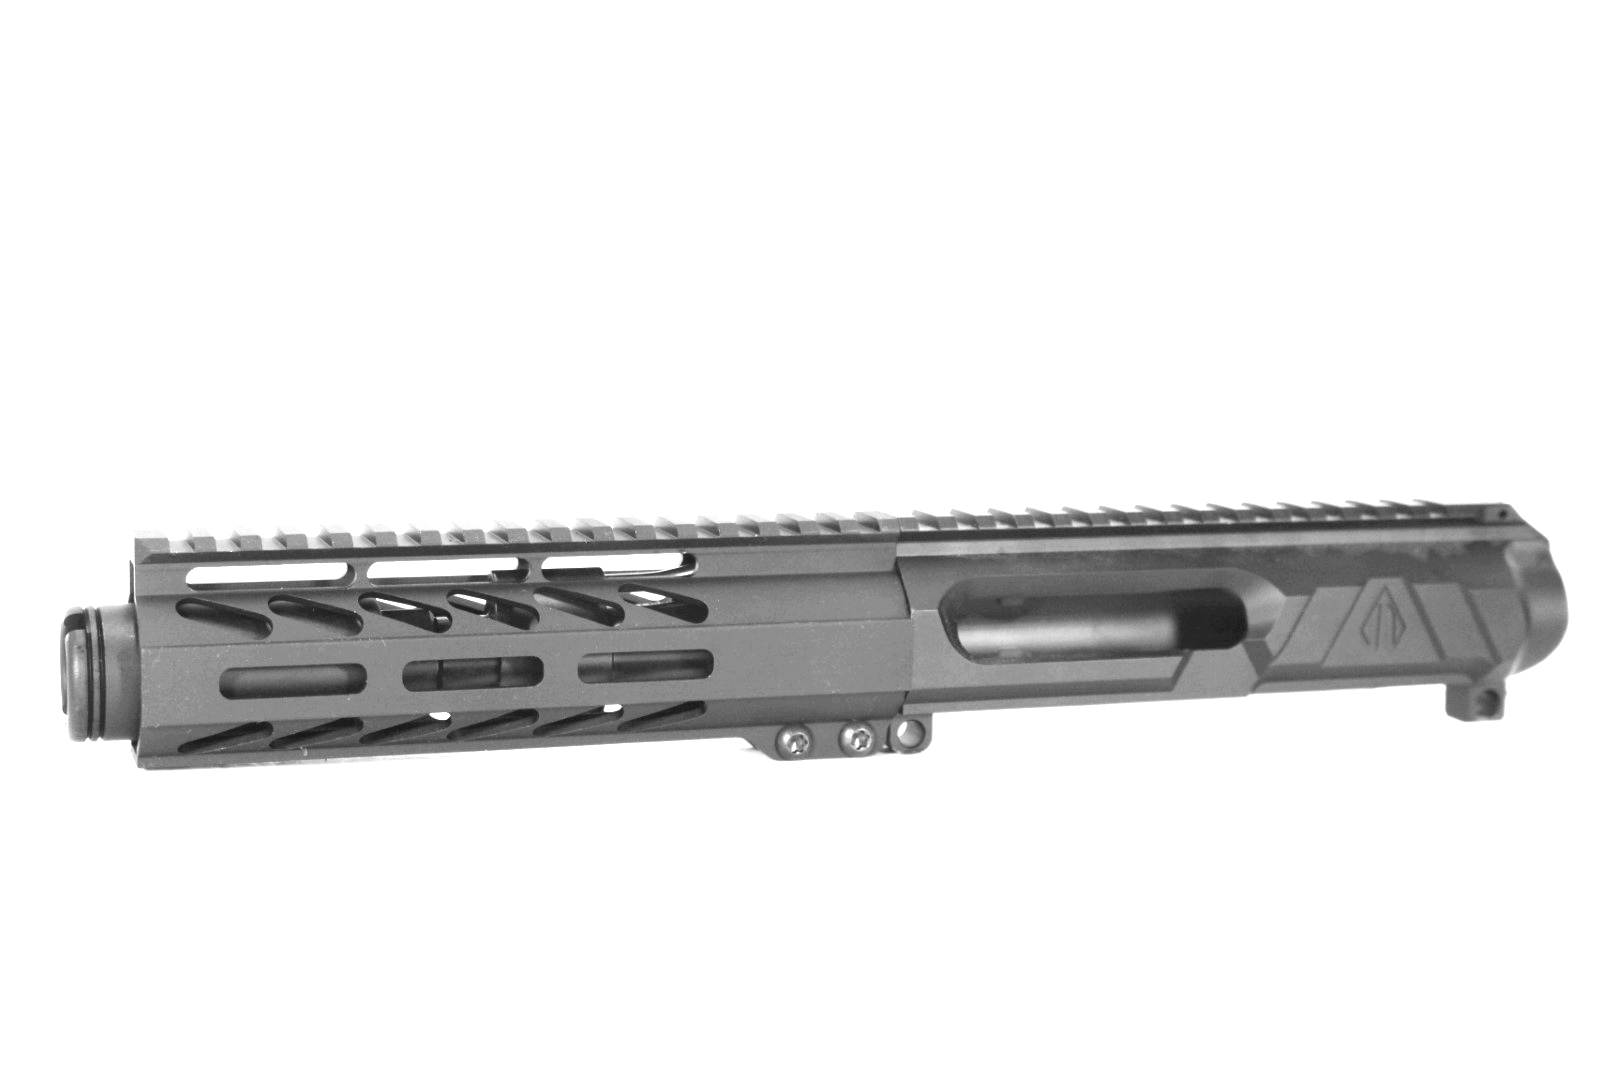 5 inch LEFT HANDED AR-15 NR Side Charging 300 Blackout Melonite Upper w/Can